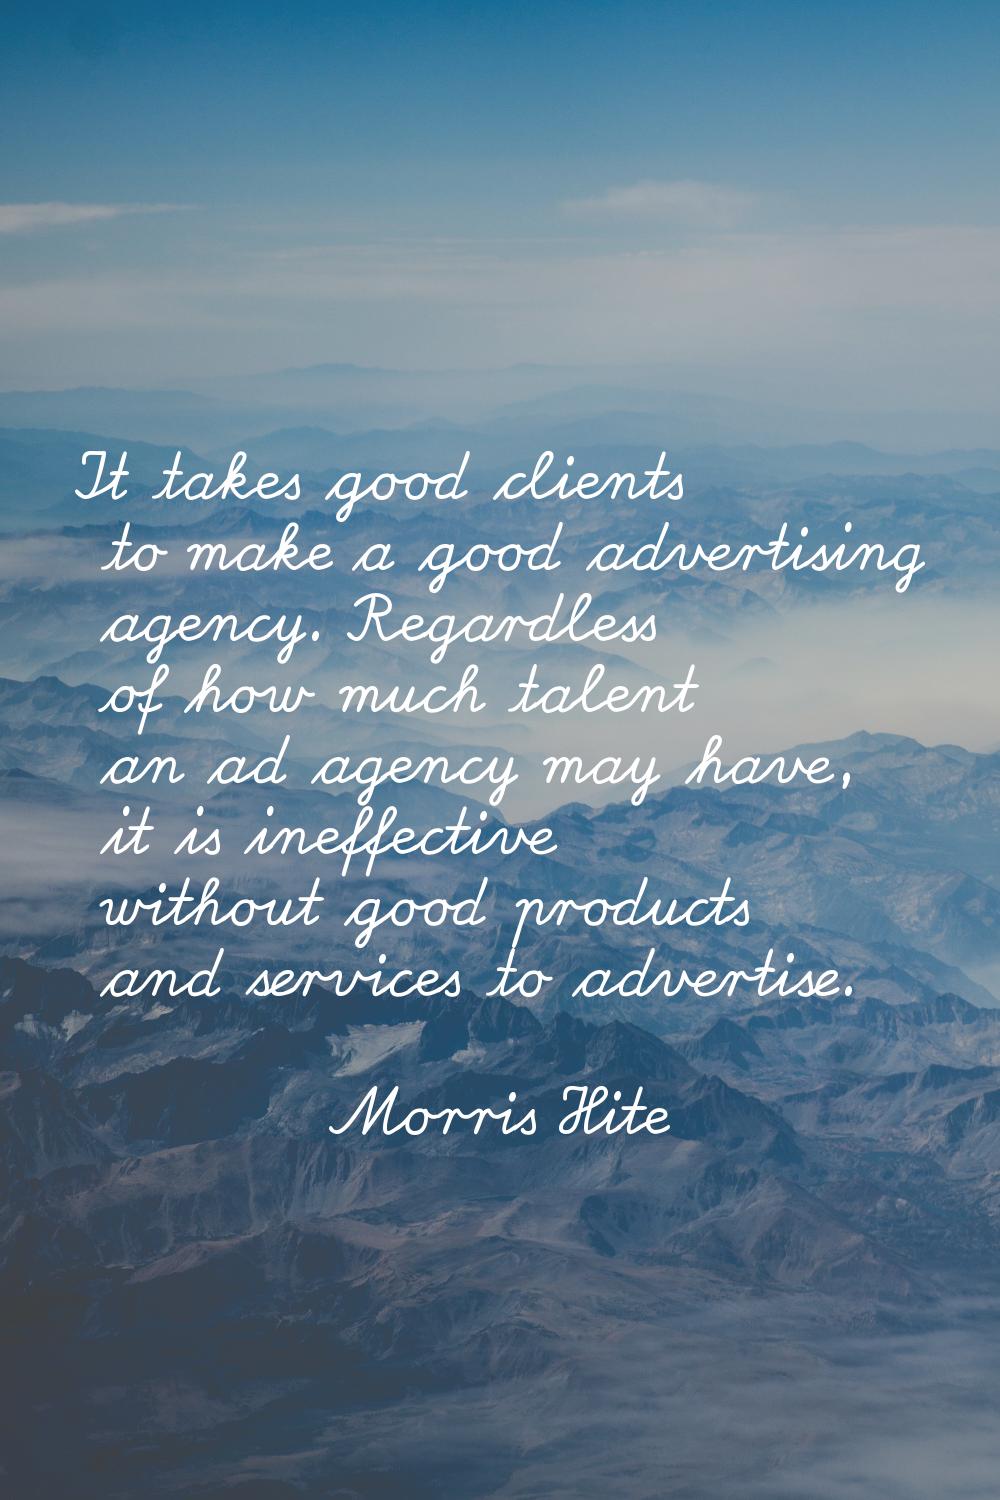 It takes good clients to make a good advertising agency. Regardless of how much talent an ad agency